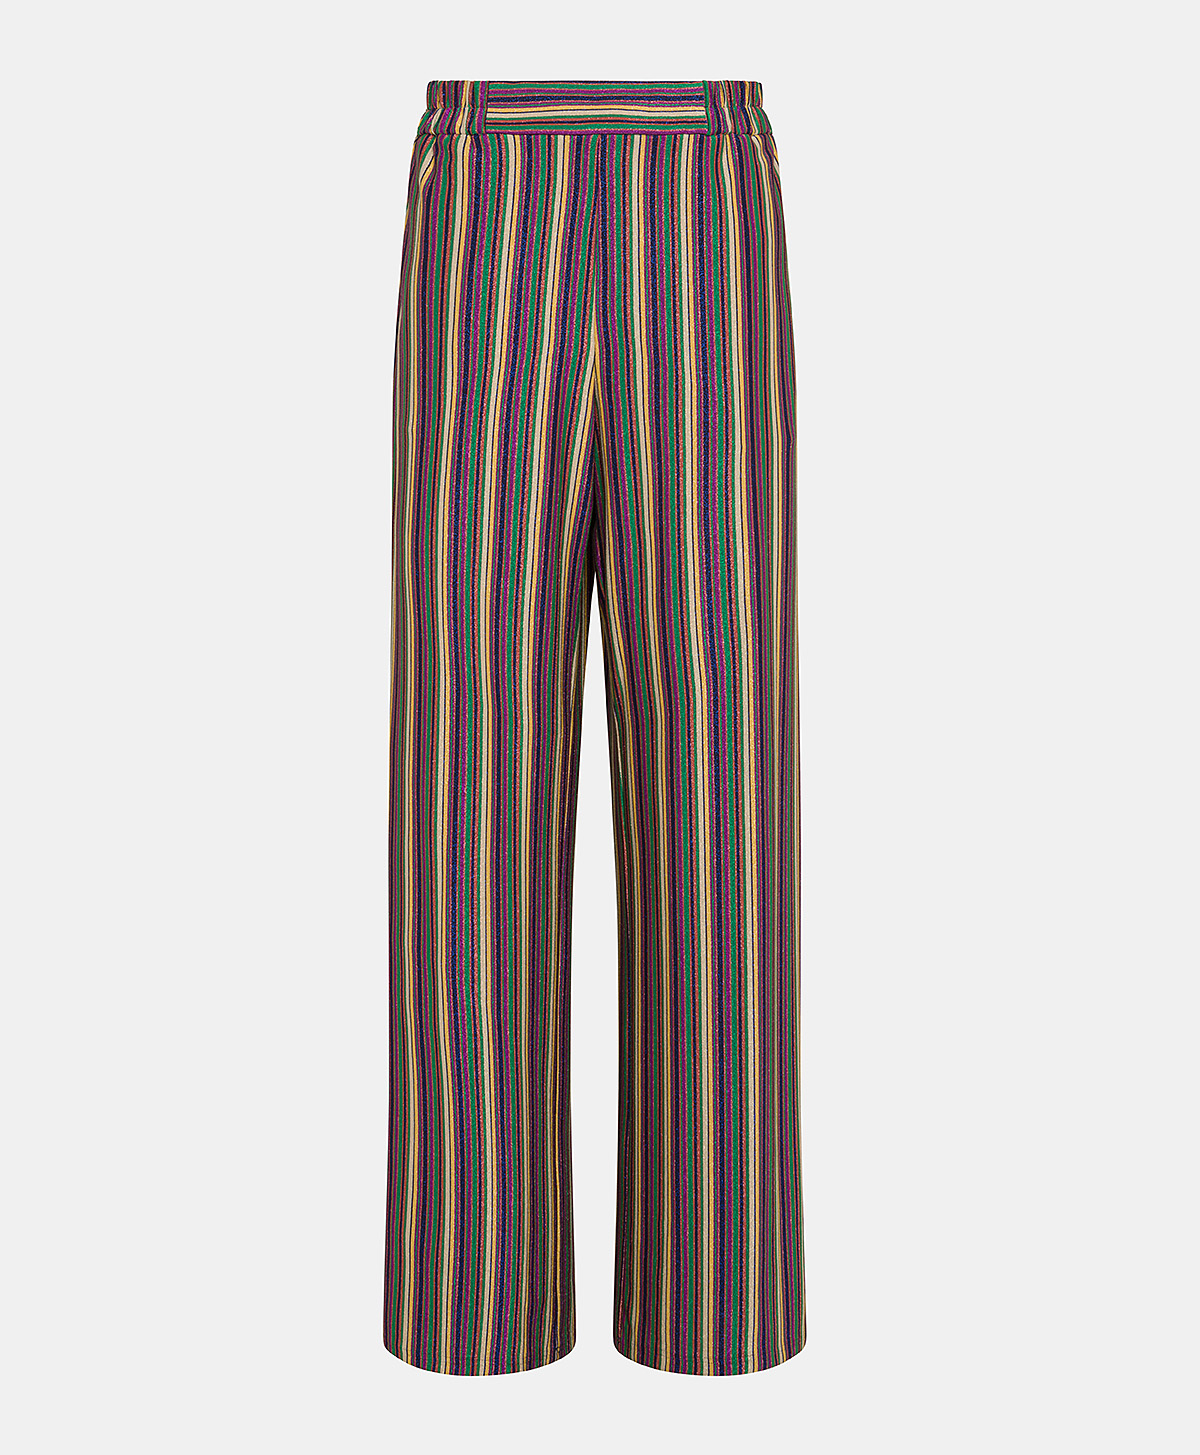 BACCARAT PANT IN STRIPED LUREX JERSEY - MULTICOLOR GREEN - Momonì